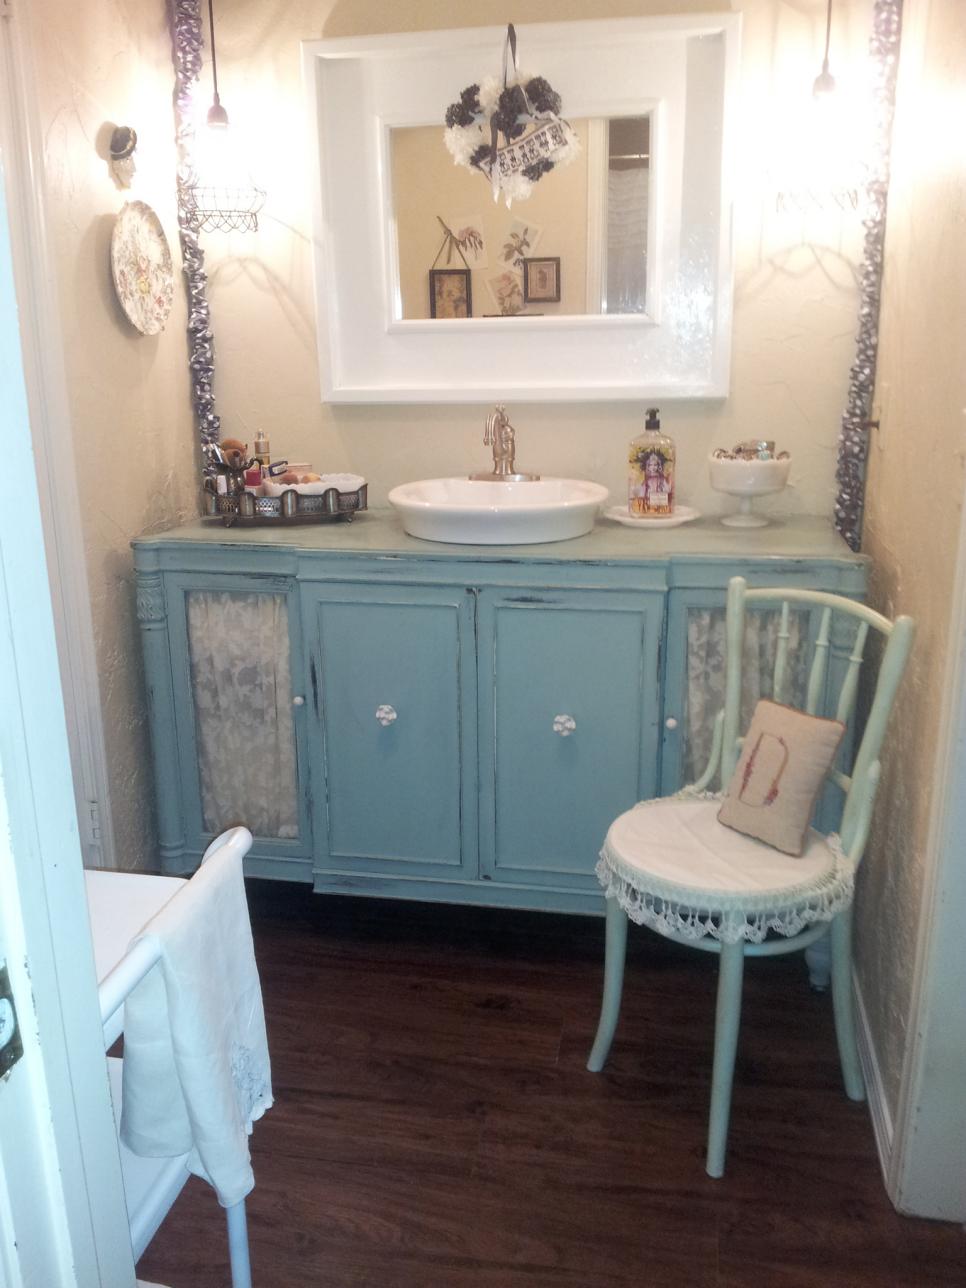 18 Bathrooms For Shabby Chic Design Inspiration